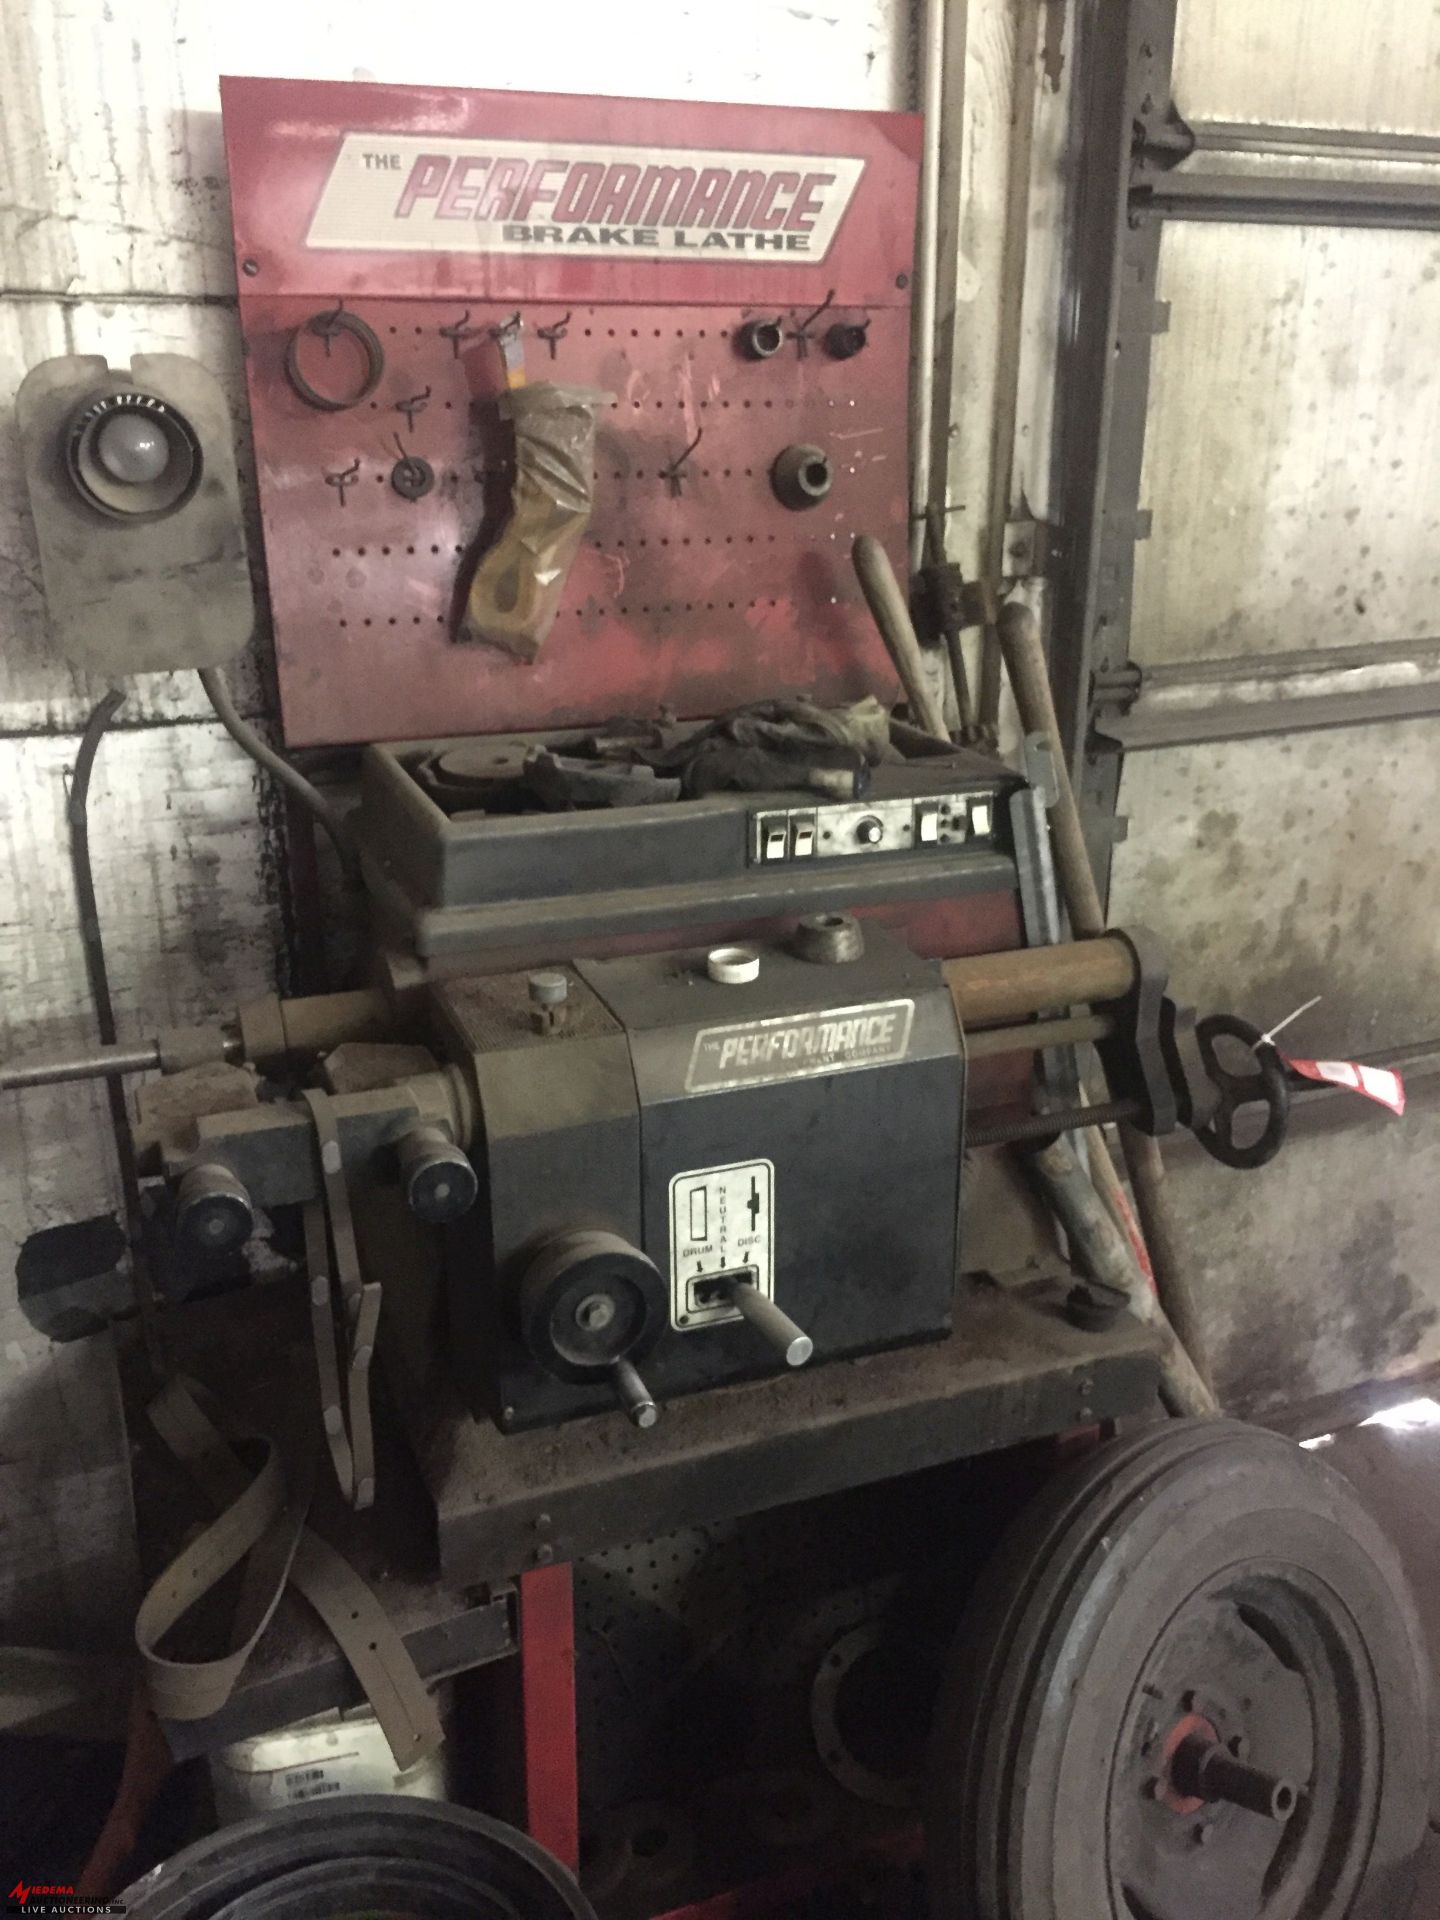 PERFORMANCE BRAKE LATHE, WITH ASSORTED TOOLING [WORKING CONDITION UNKNOWN] [LOCATION: EAST WINANS